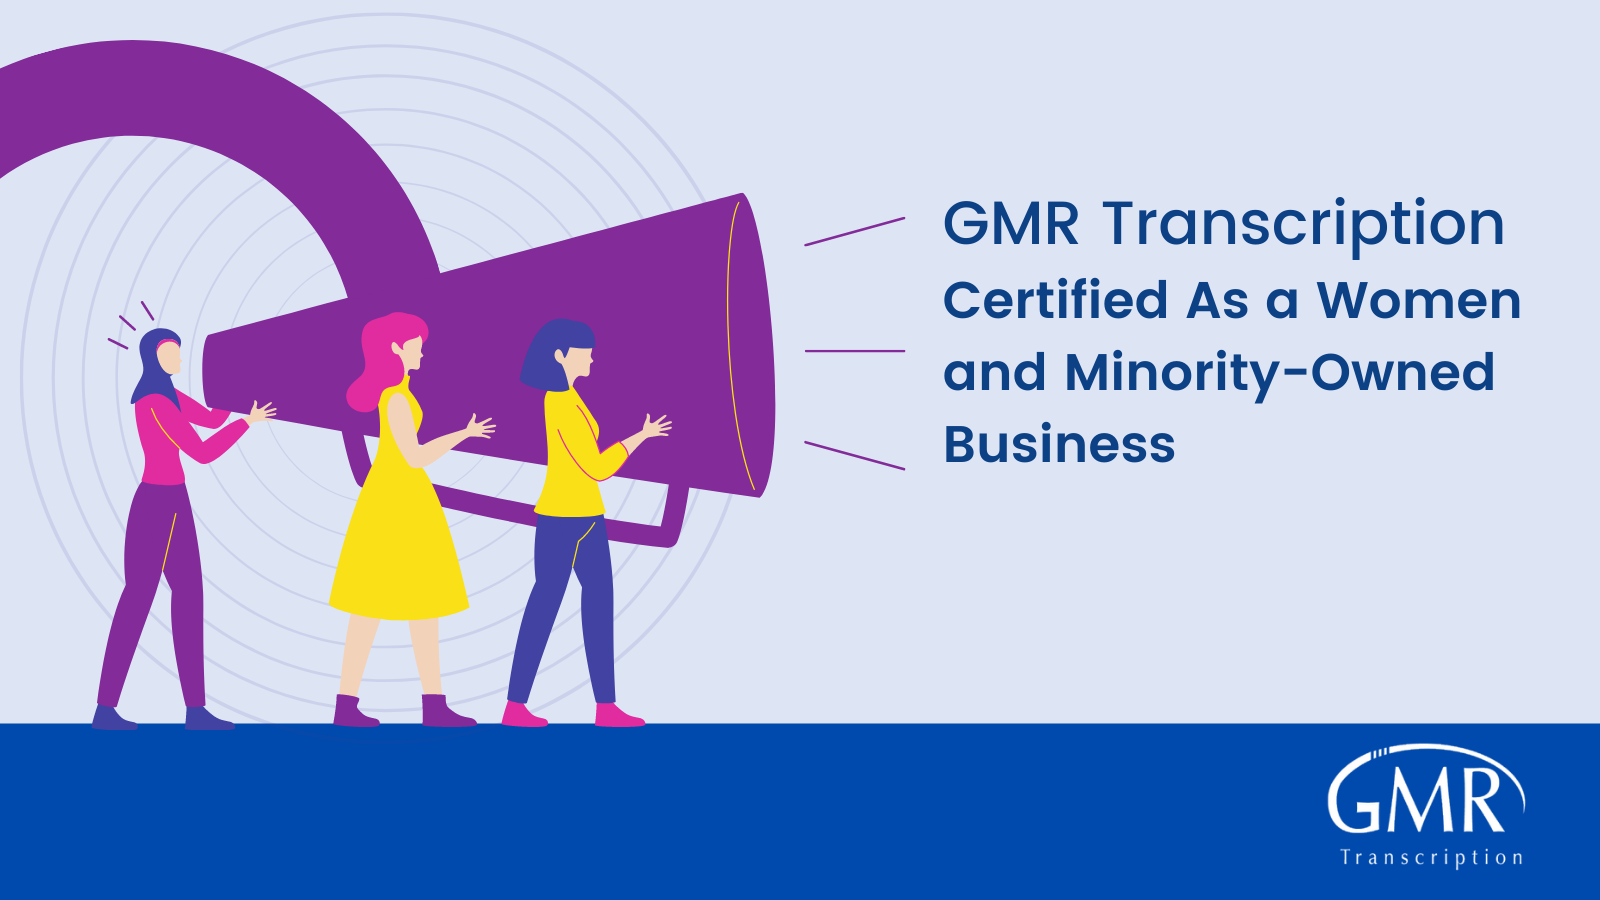 _— GMR Transcription

Certified As a Women
~ and Minority-Owned
—_ Business